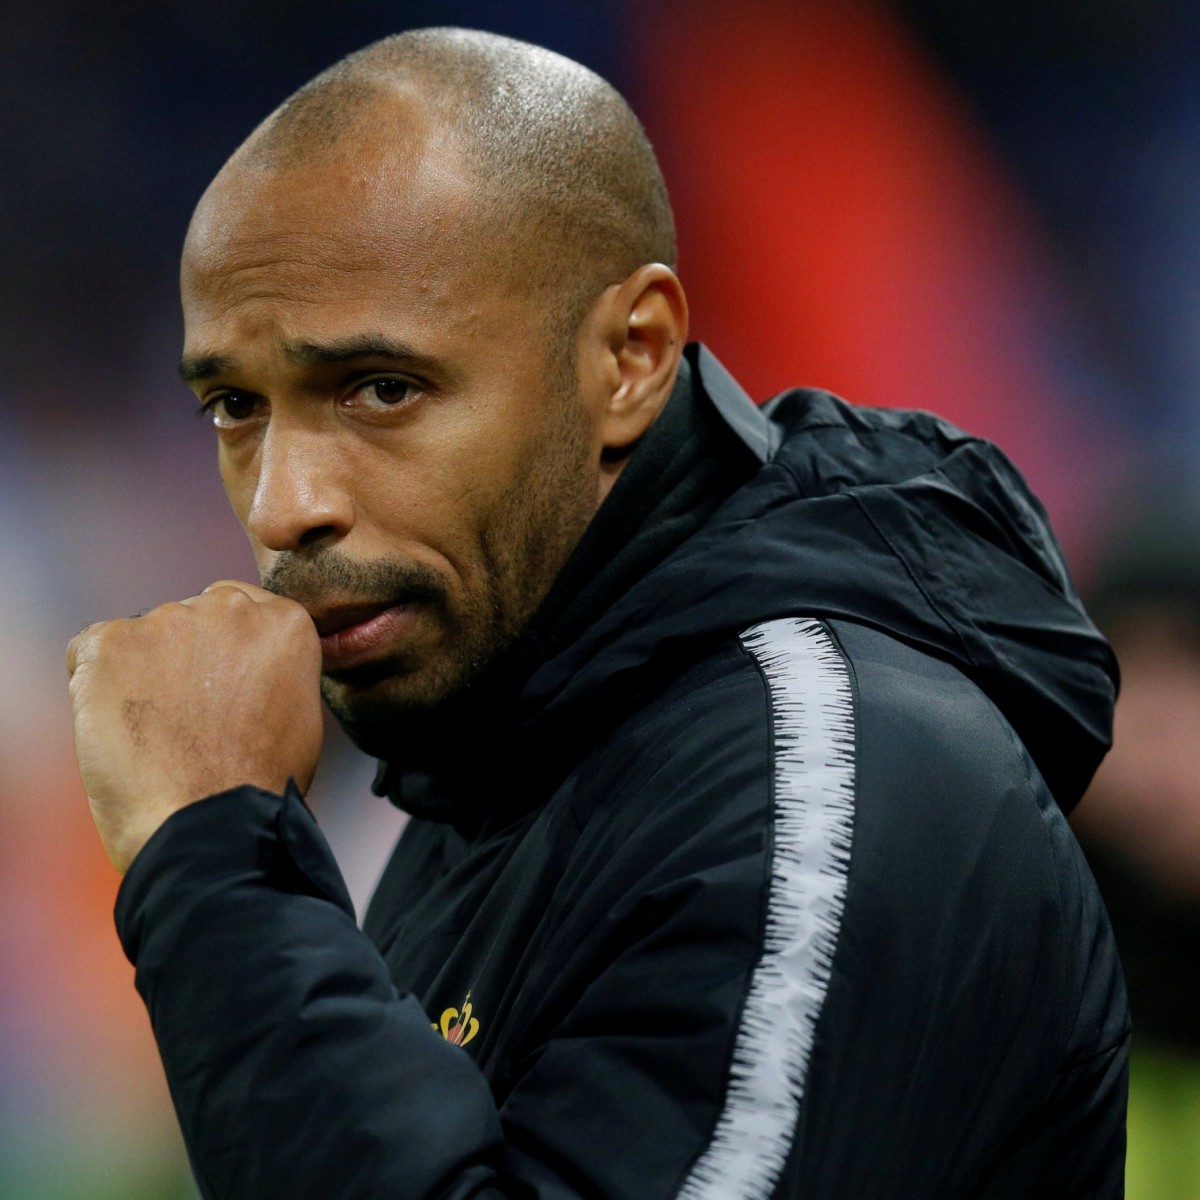 Thierry Henry has included Michael Laudrup alongside more famous stars like Pele and Maradona